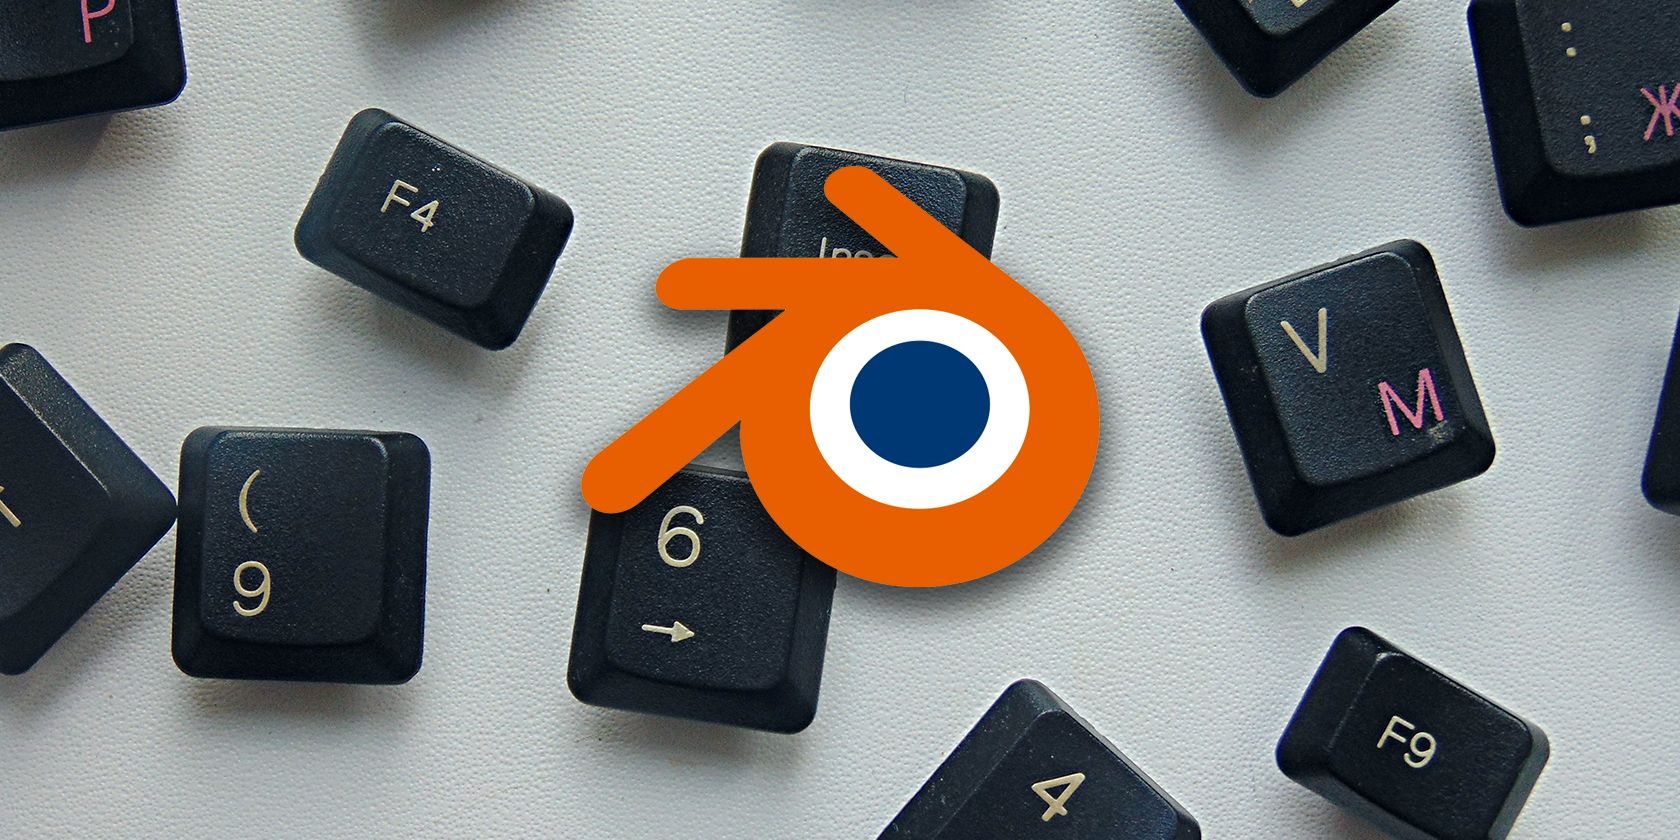 The Blender logo and some keyboard caps.